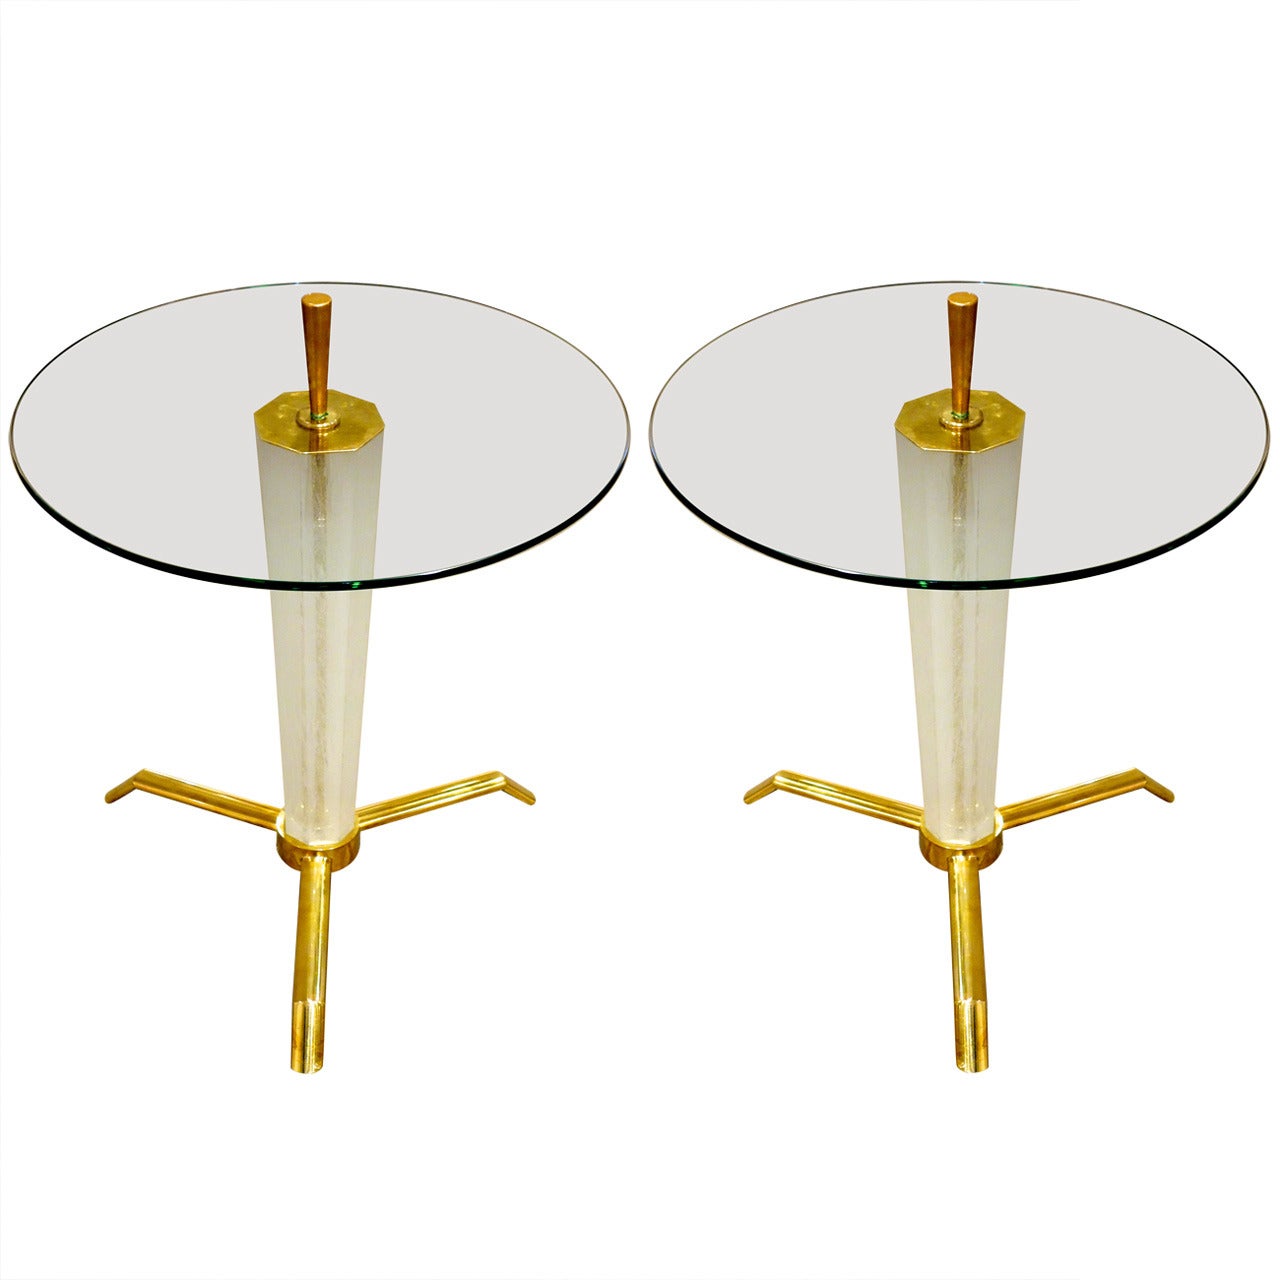 A MId-Century Italian Fluted Murano Glass Tripod Side/End Table